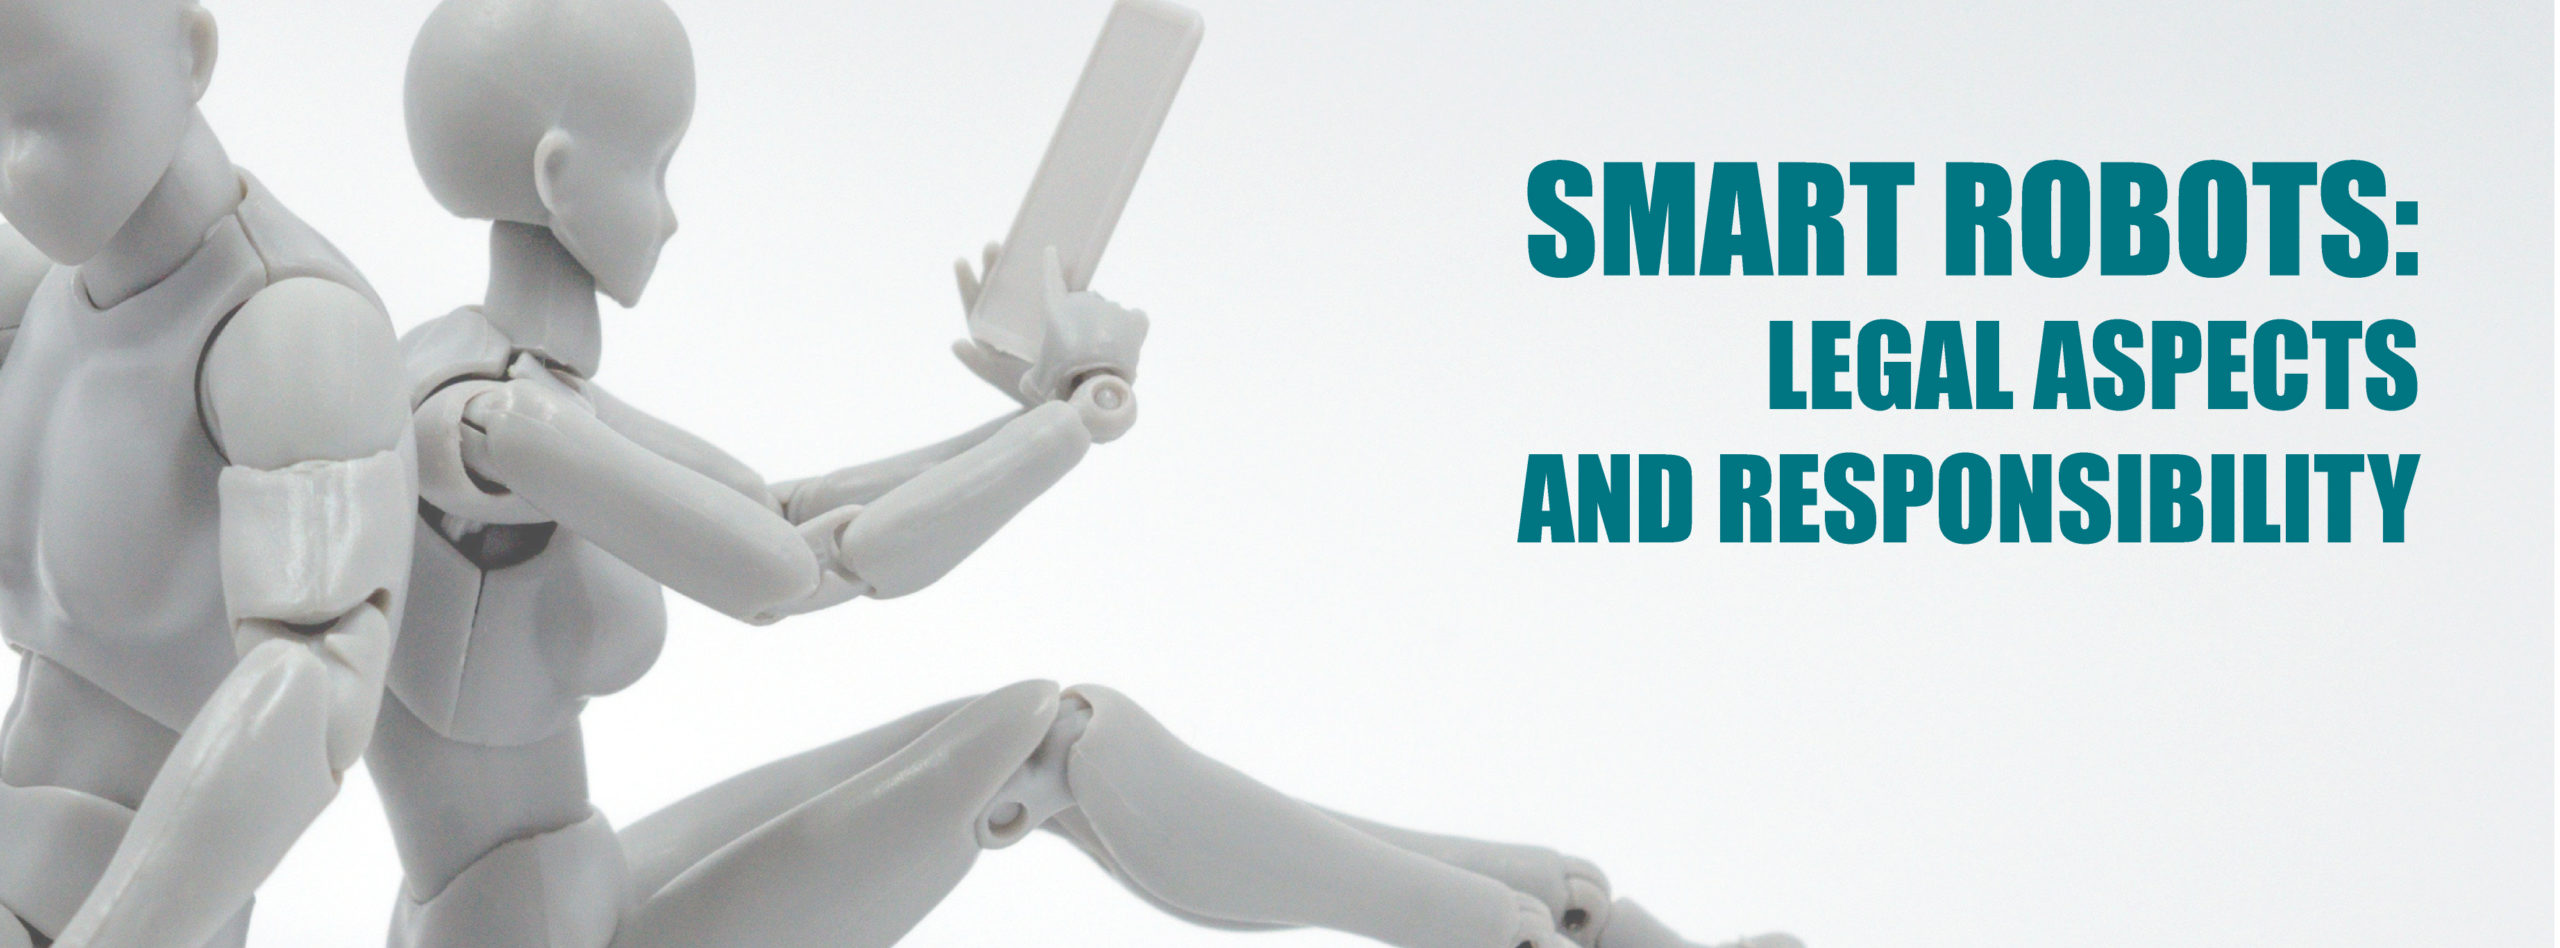 SMART ROBOTS: LEGAL ASPECTS AND RESPONSIBILITY